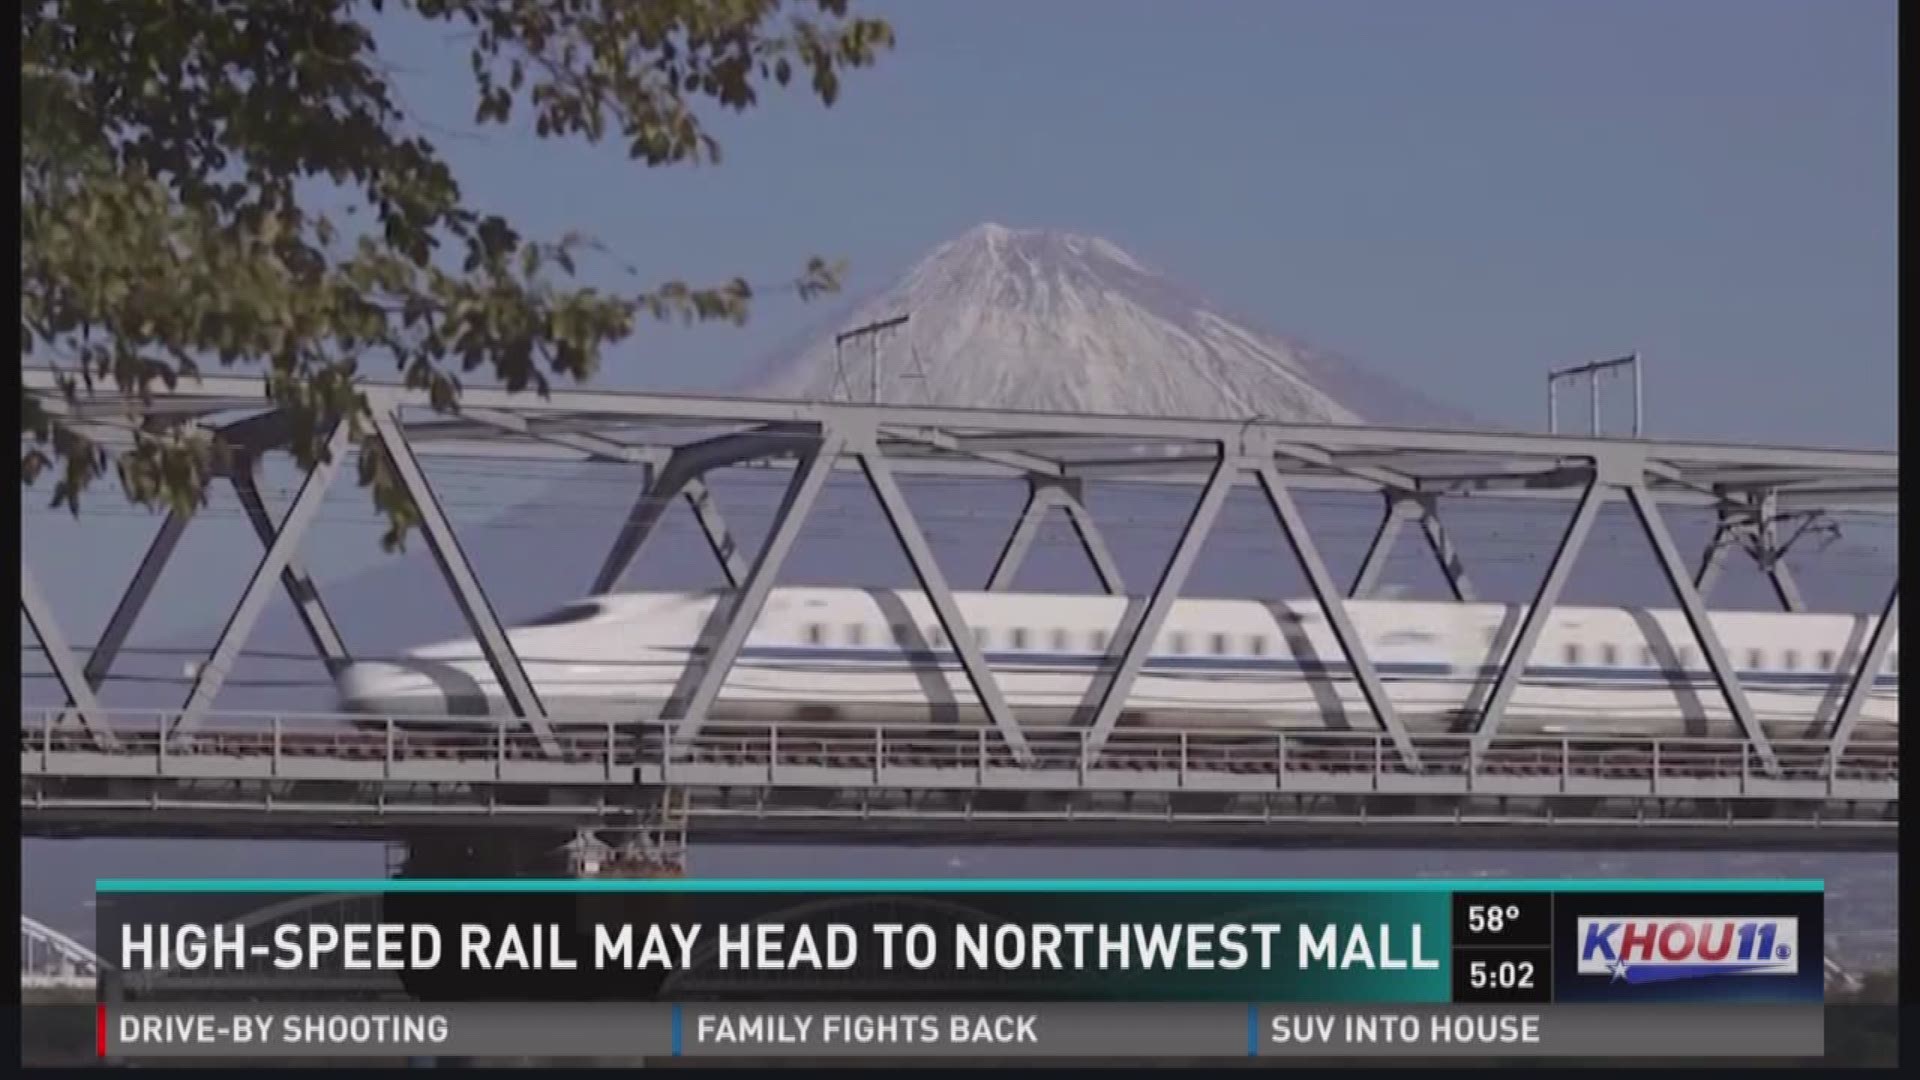  Texas Central announced Monday that Northwest Mall is the "preferred location" for the Houston bullet train station. The mall would be bulldozed to make room for a state of the art rail station. "This station, this bullet train, is a game changer," said 